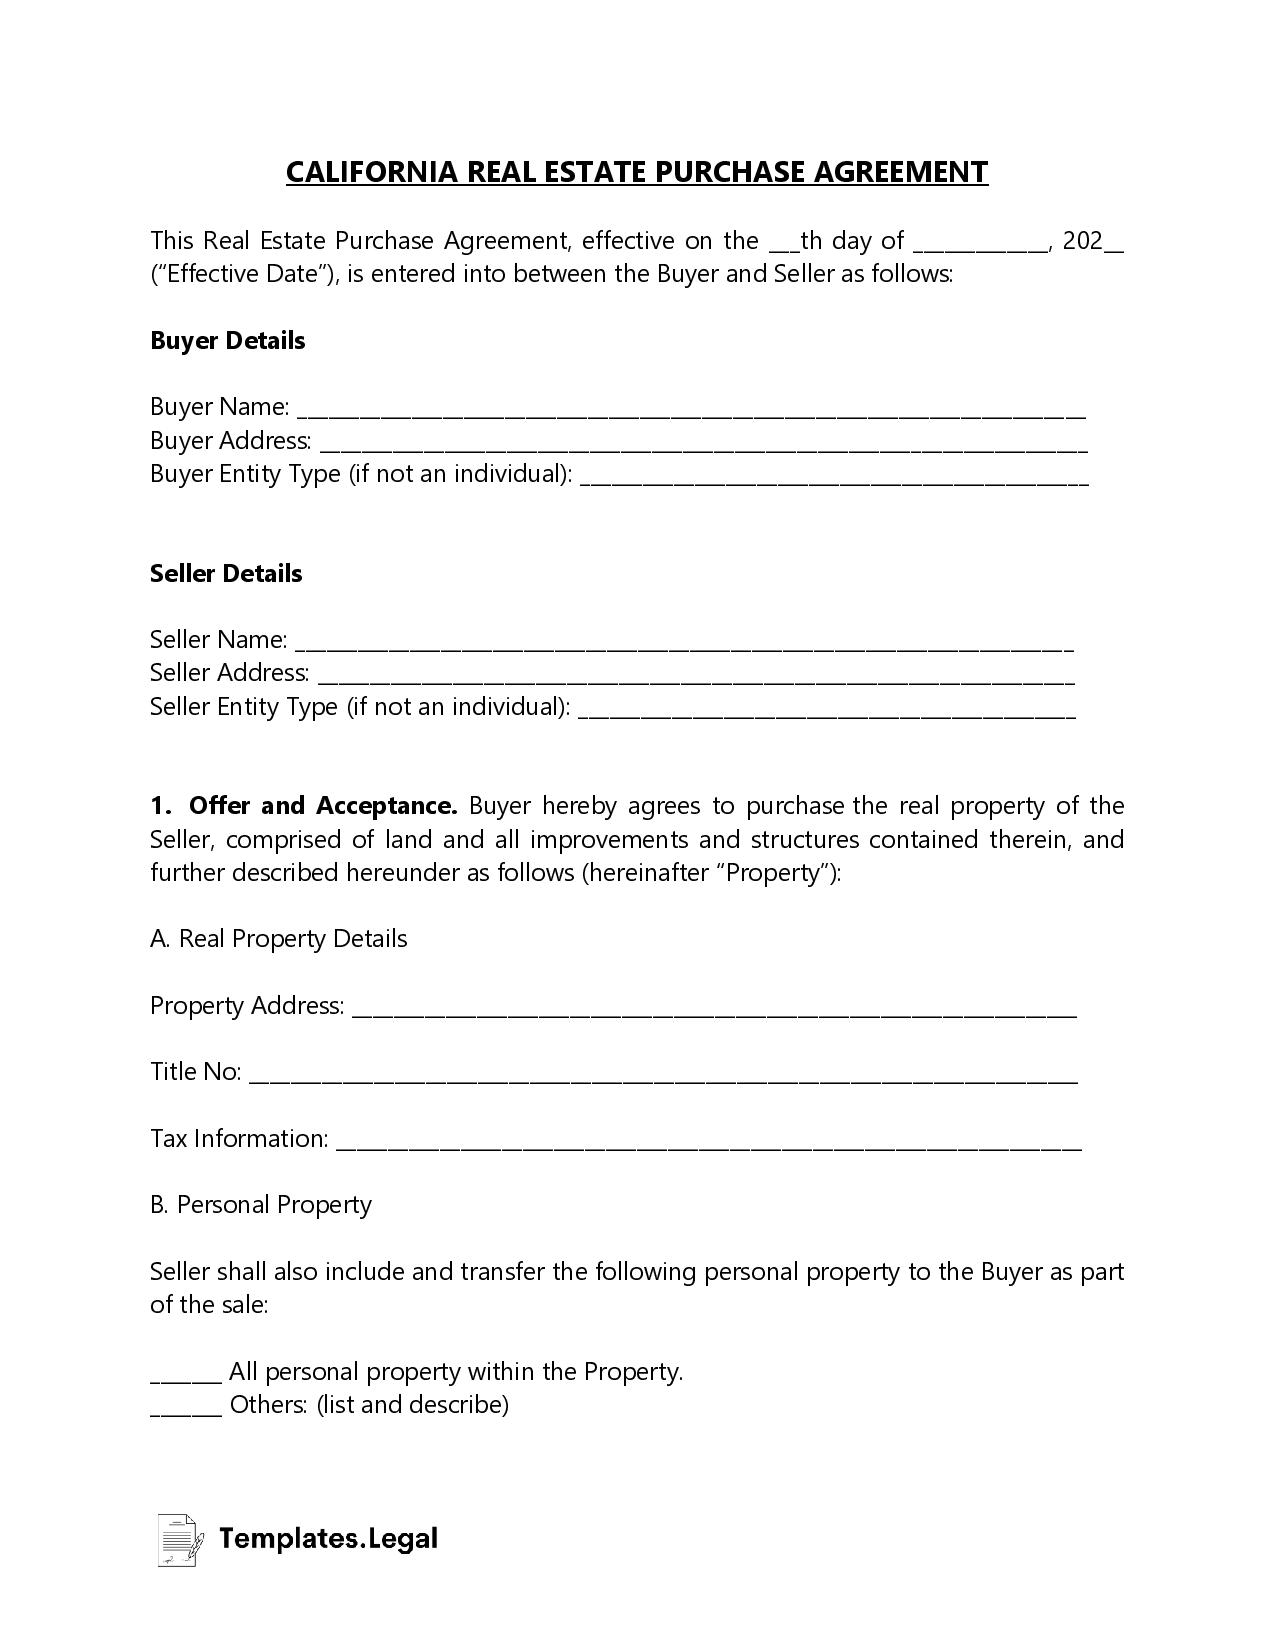 California Real Estate Purchase Agreement - Templates.Legal